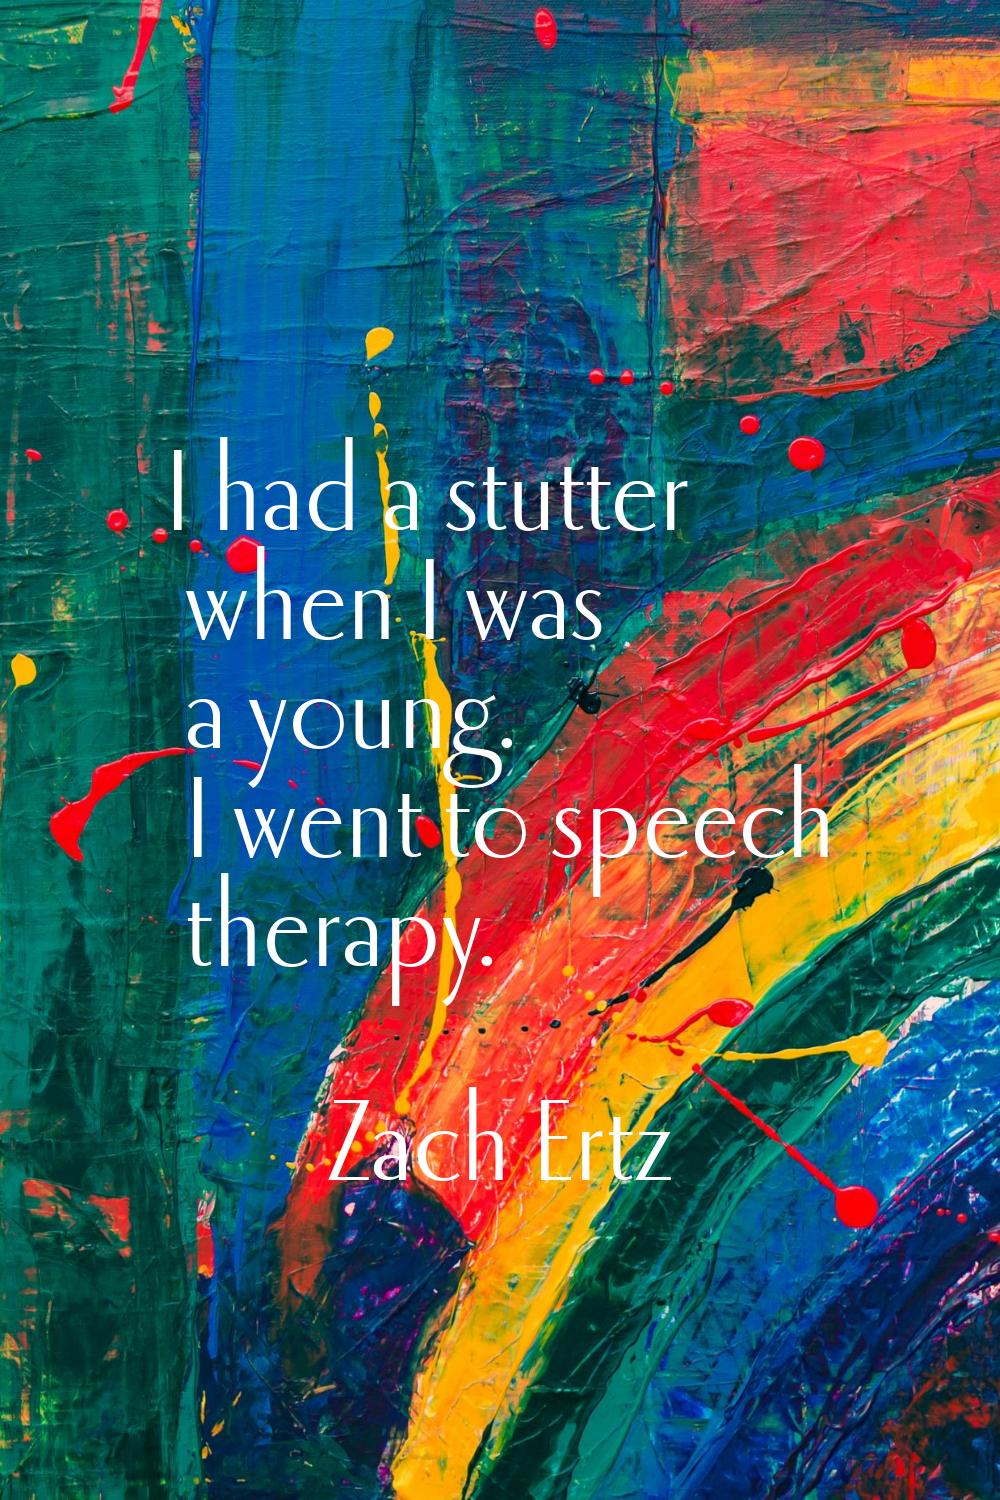 I had a stutter when I was a young. I went to speech therapy.